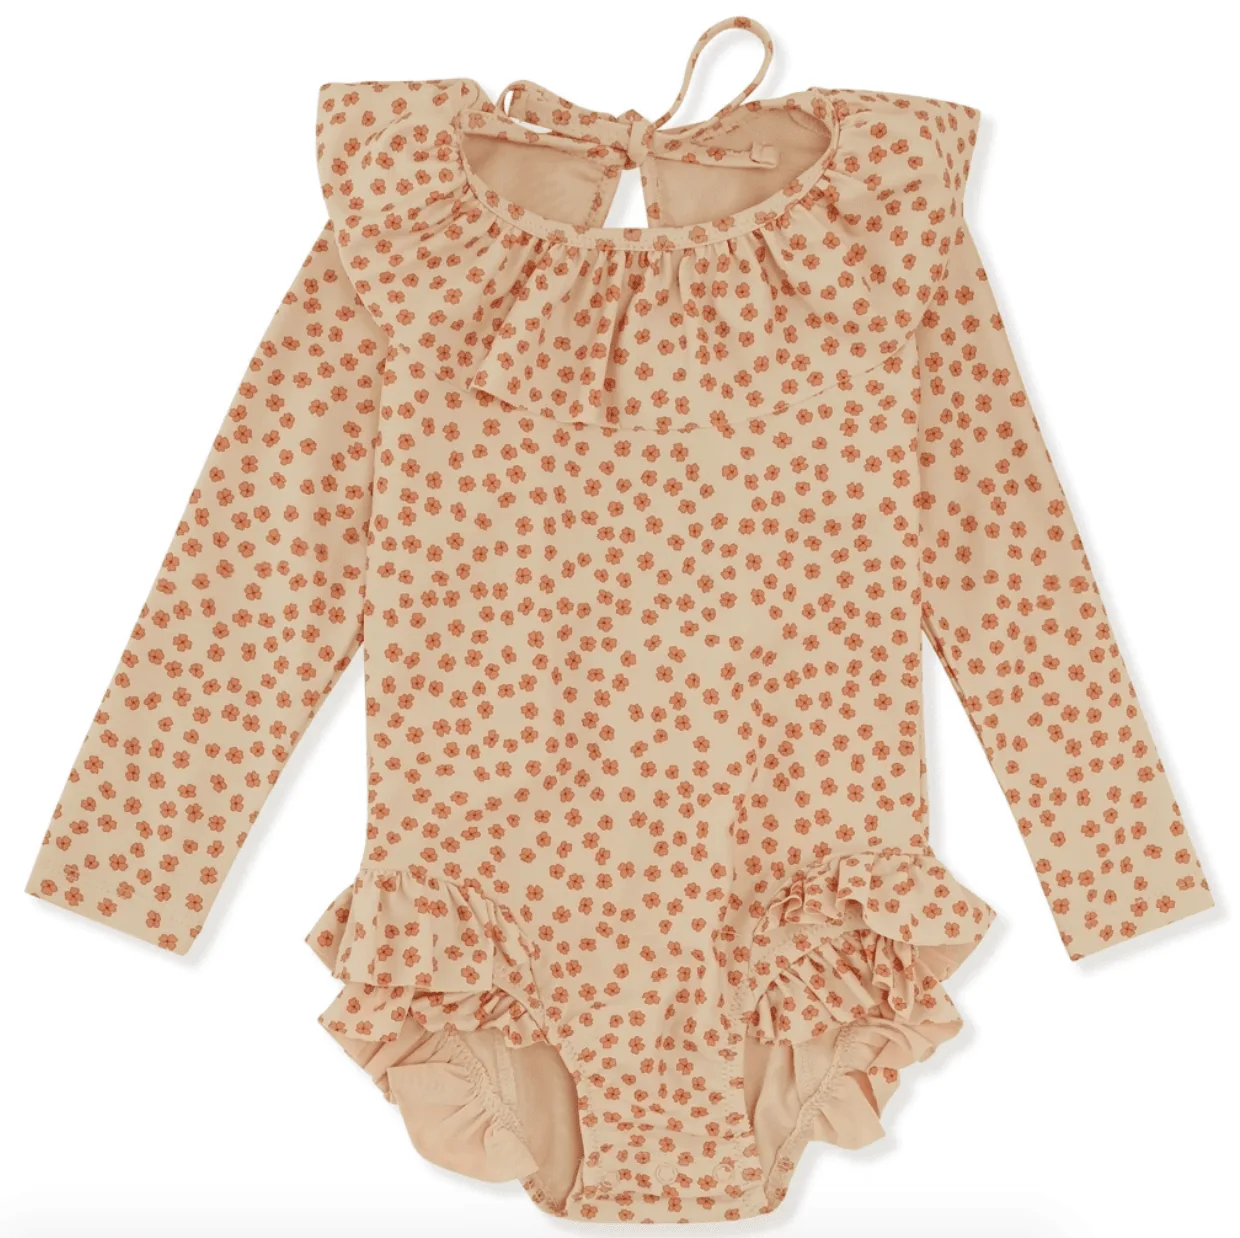 Buttercup flowers on a ruffled long-sleeved swimsuit